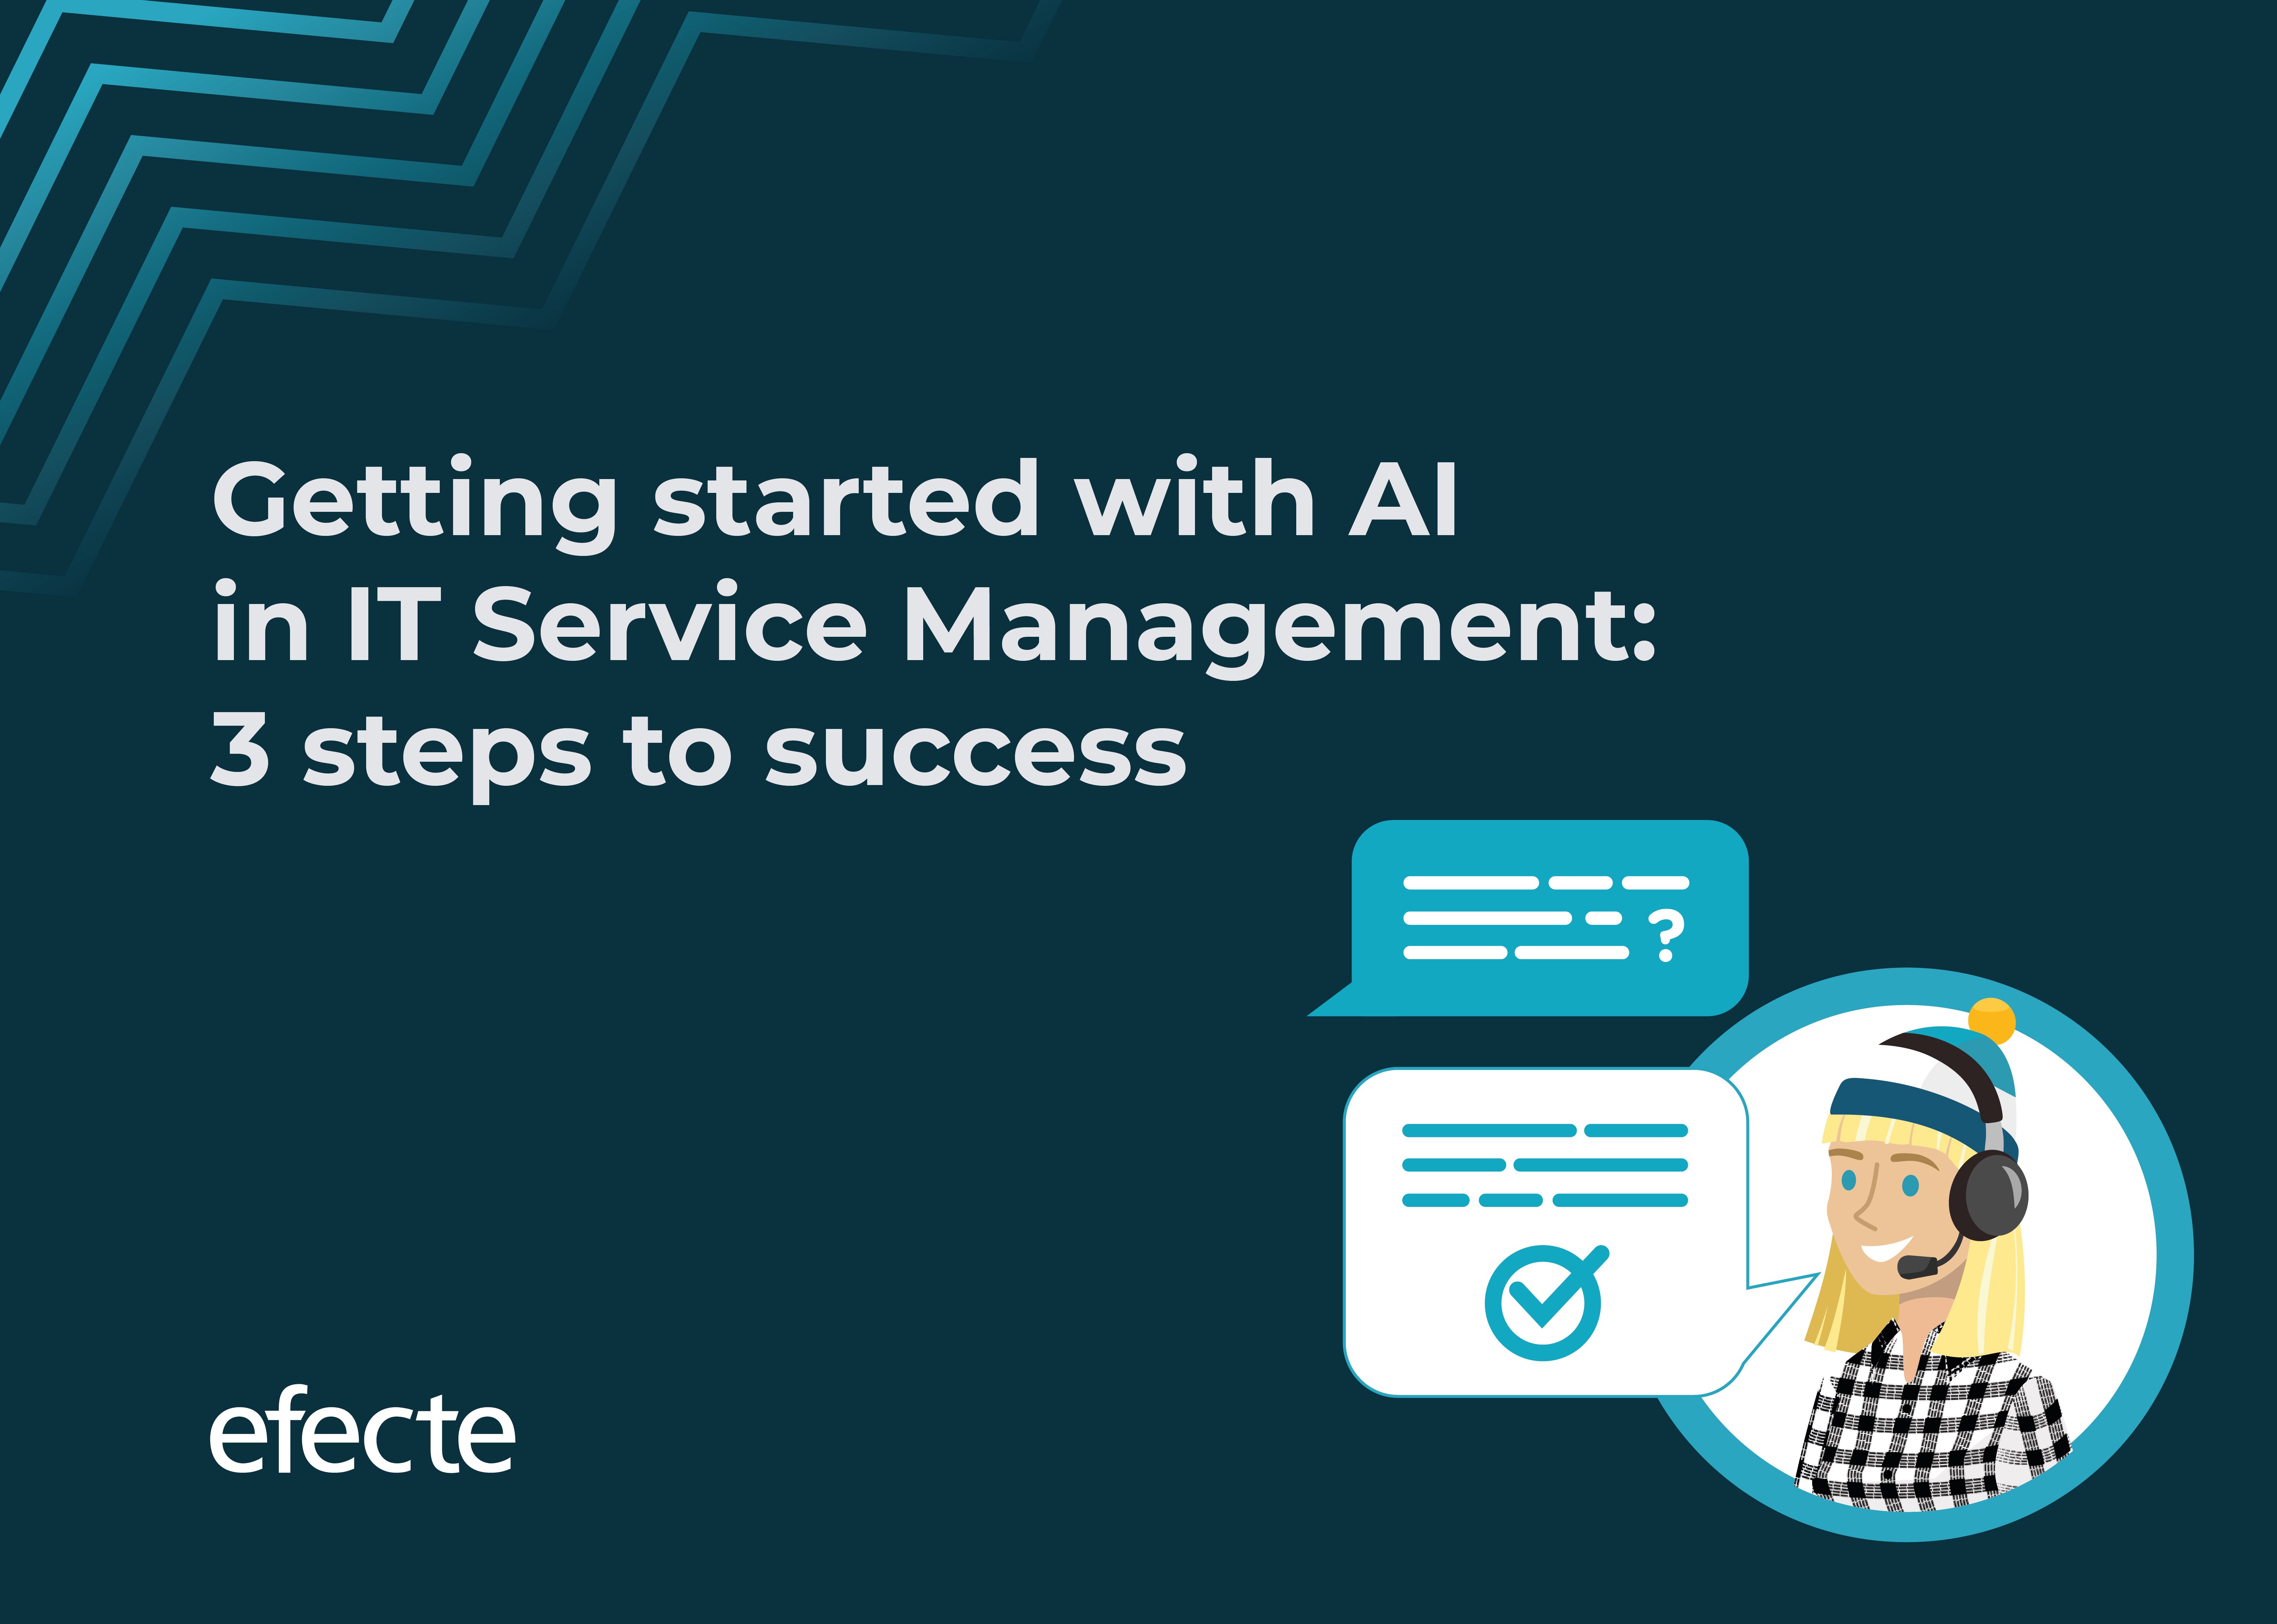 Getting started with AI in IT Service Management- 3 steps to success